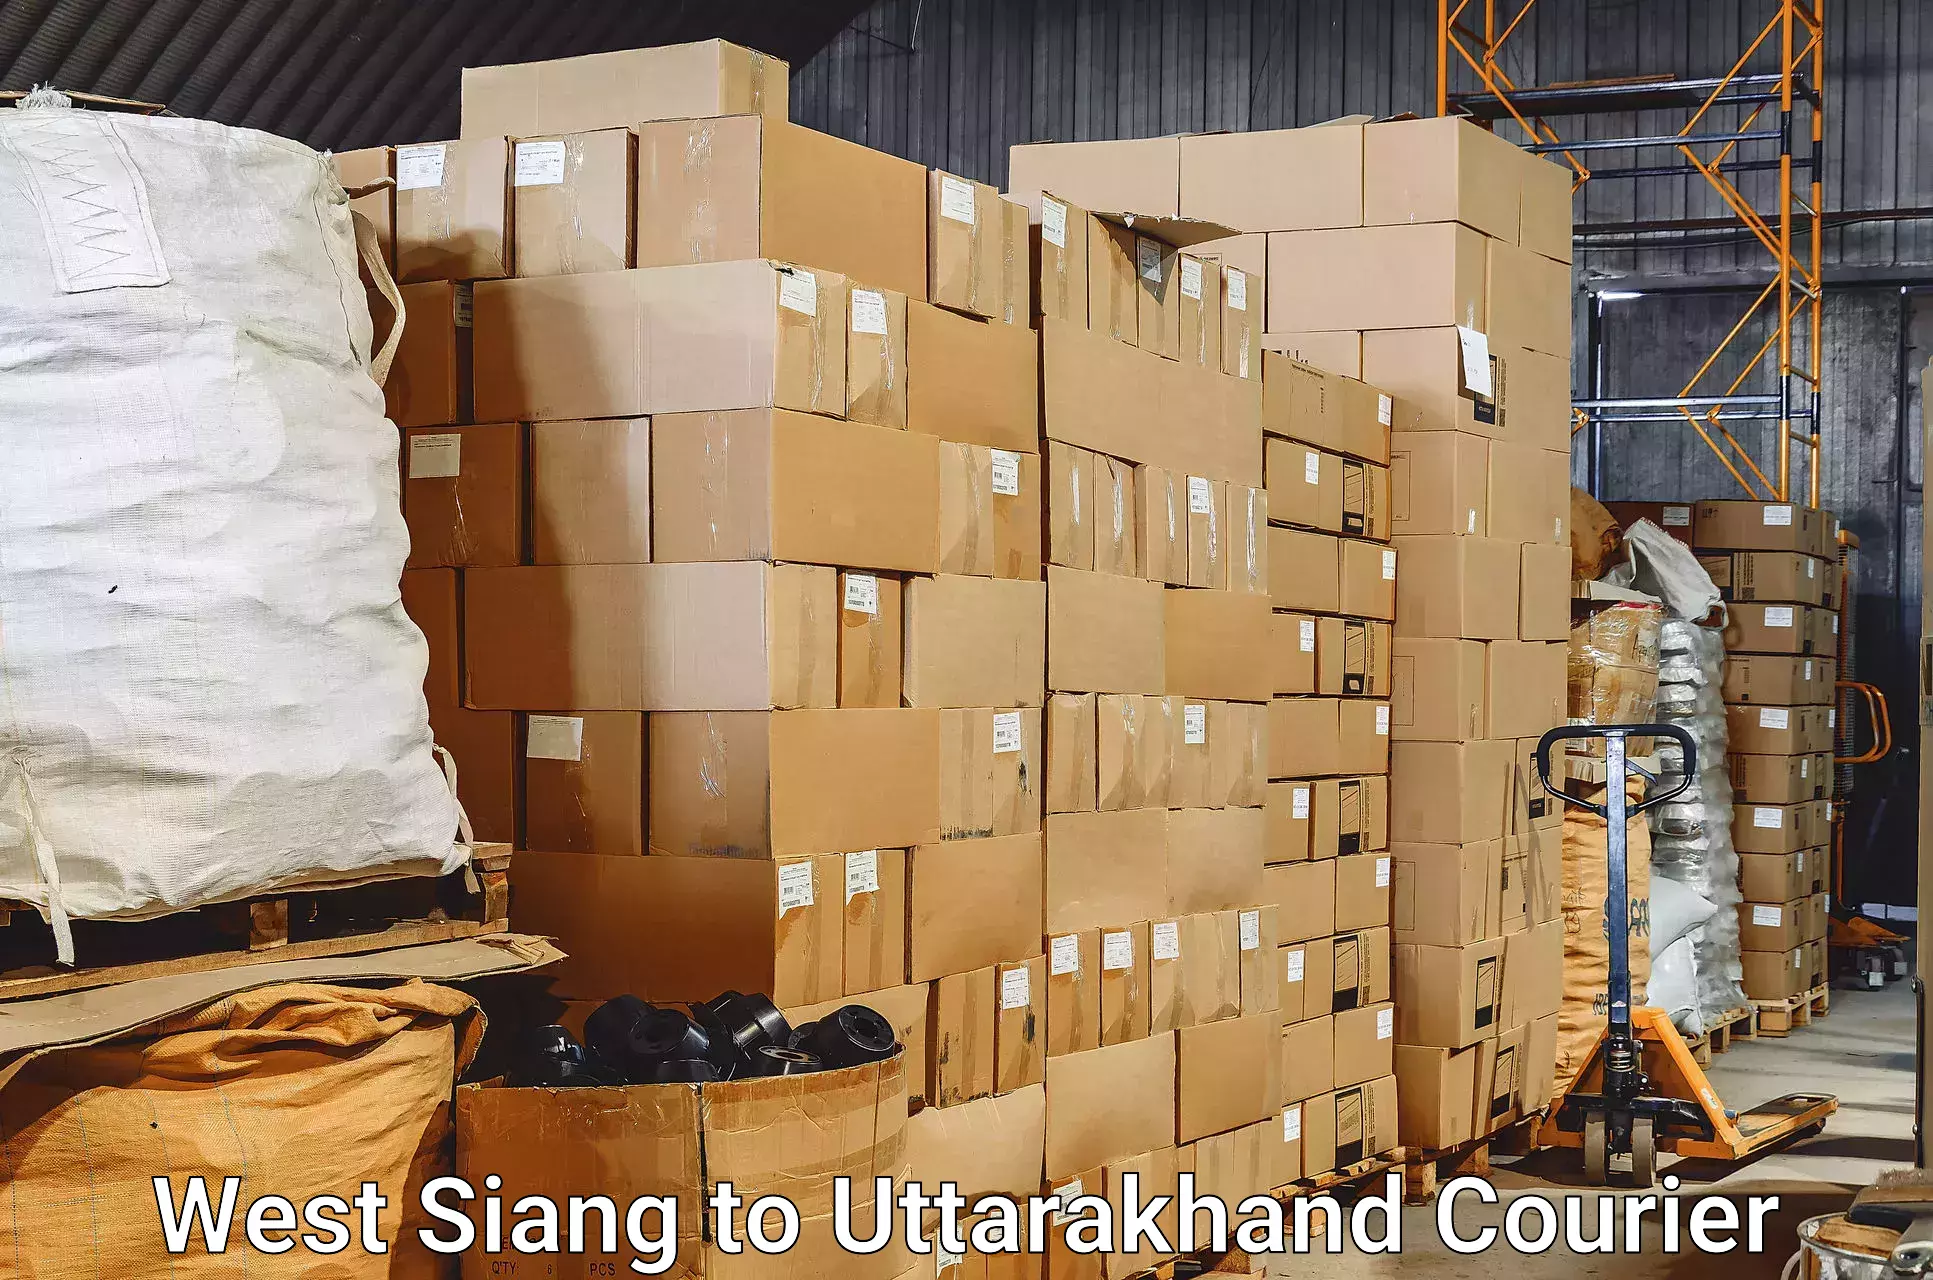 Baggage transport scheduler West Siang to Uttarakhand